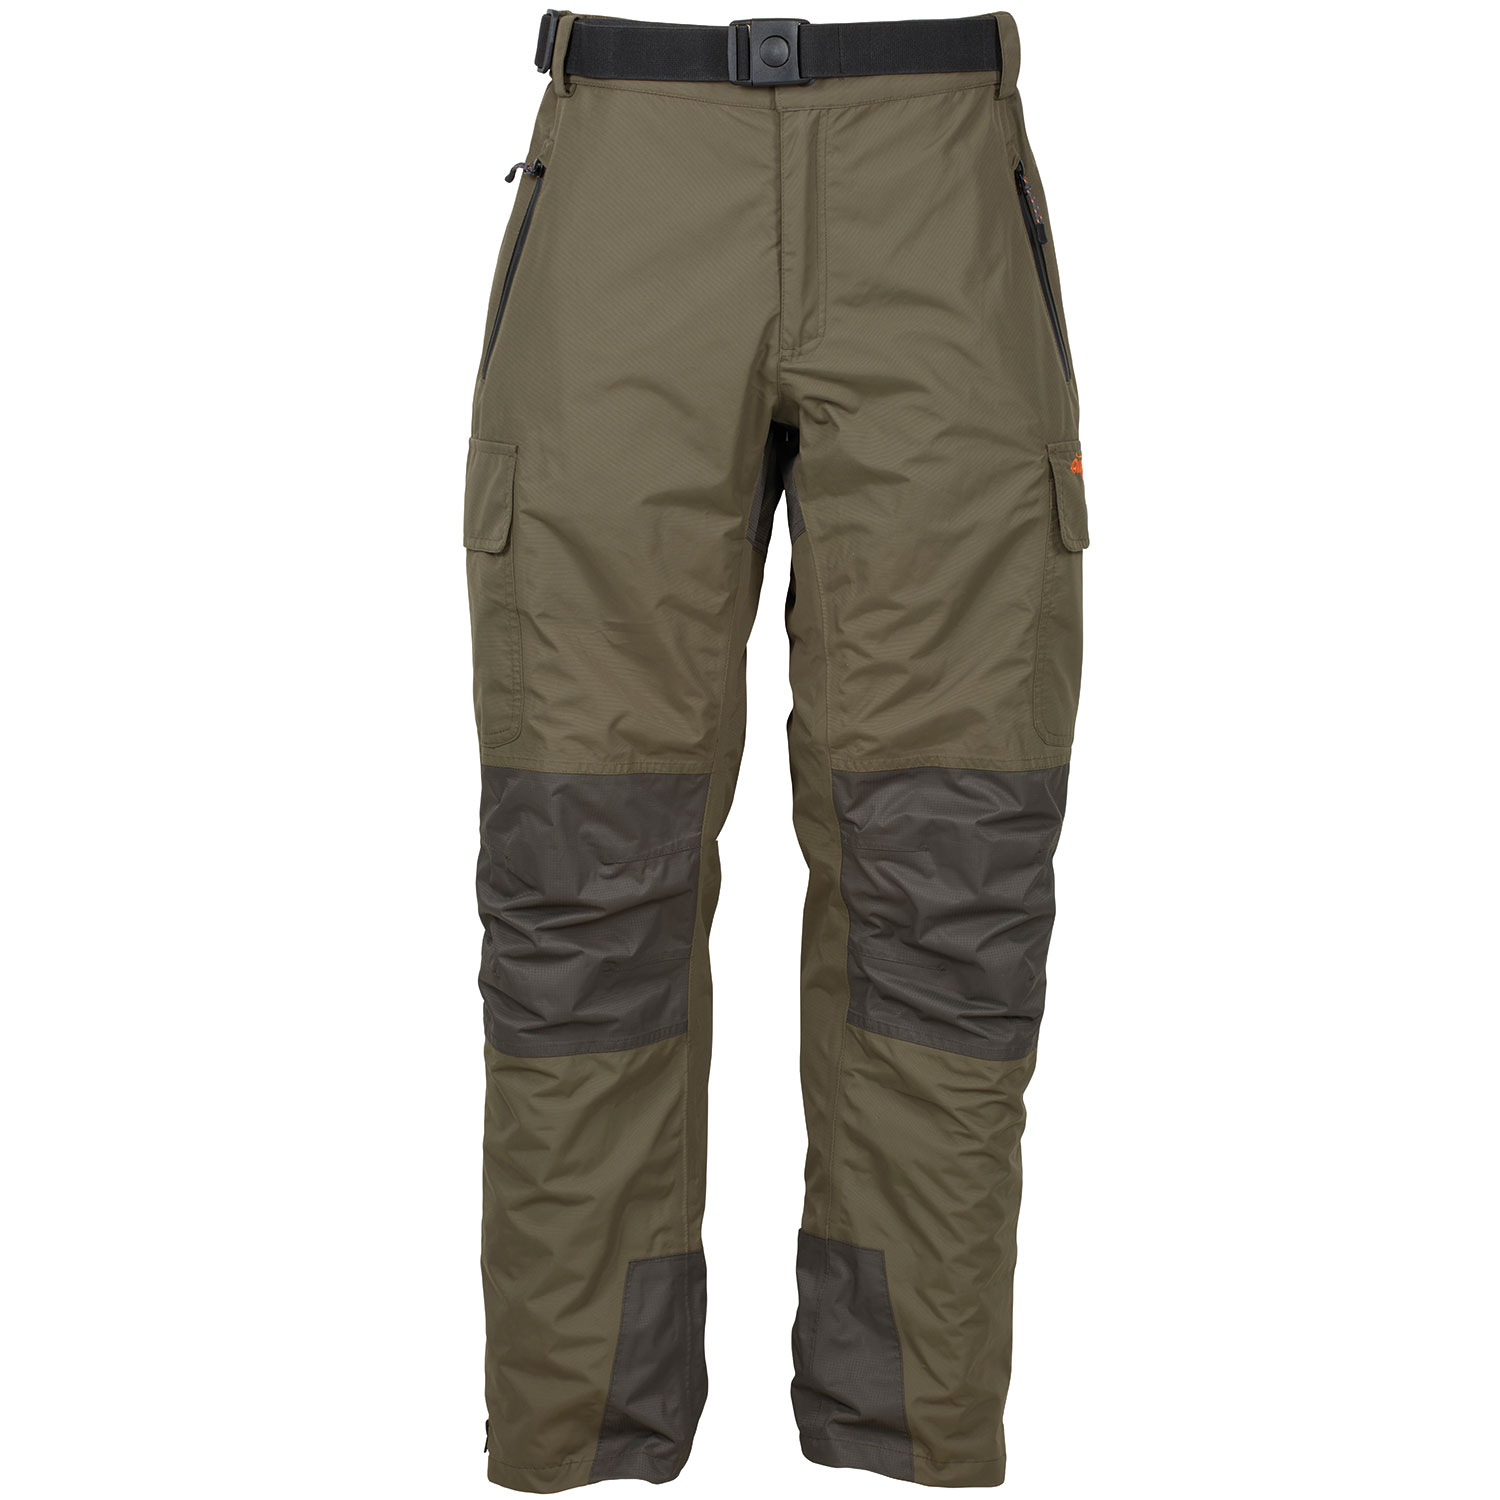 Airflo Defender Trousers Fly Fishing Pants Green/Brown All Sizes F-DEFEND-T 